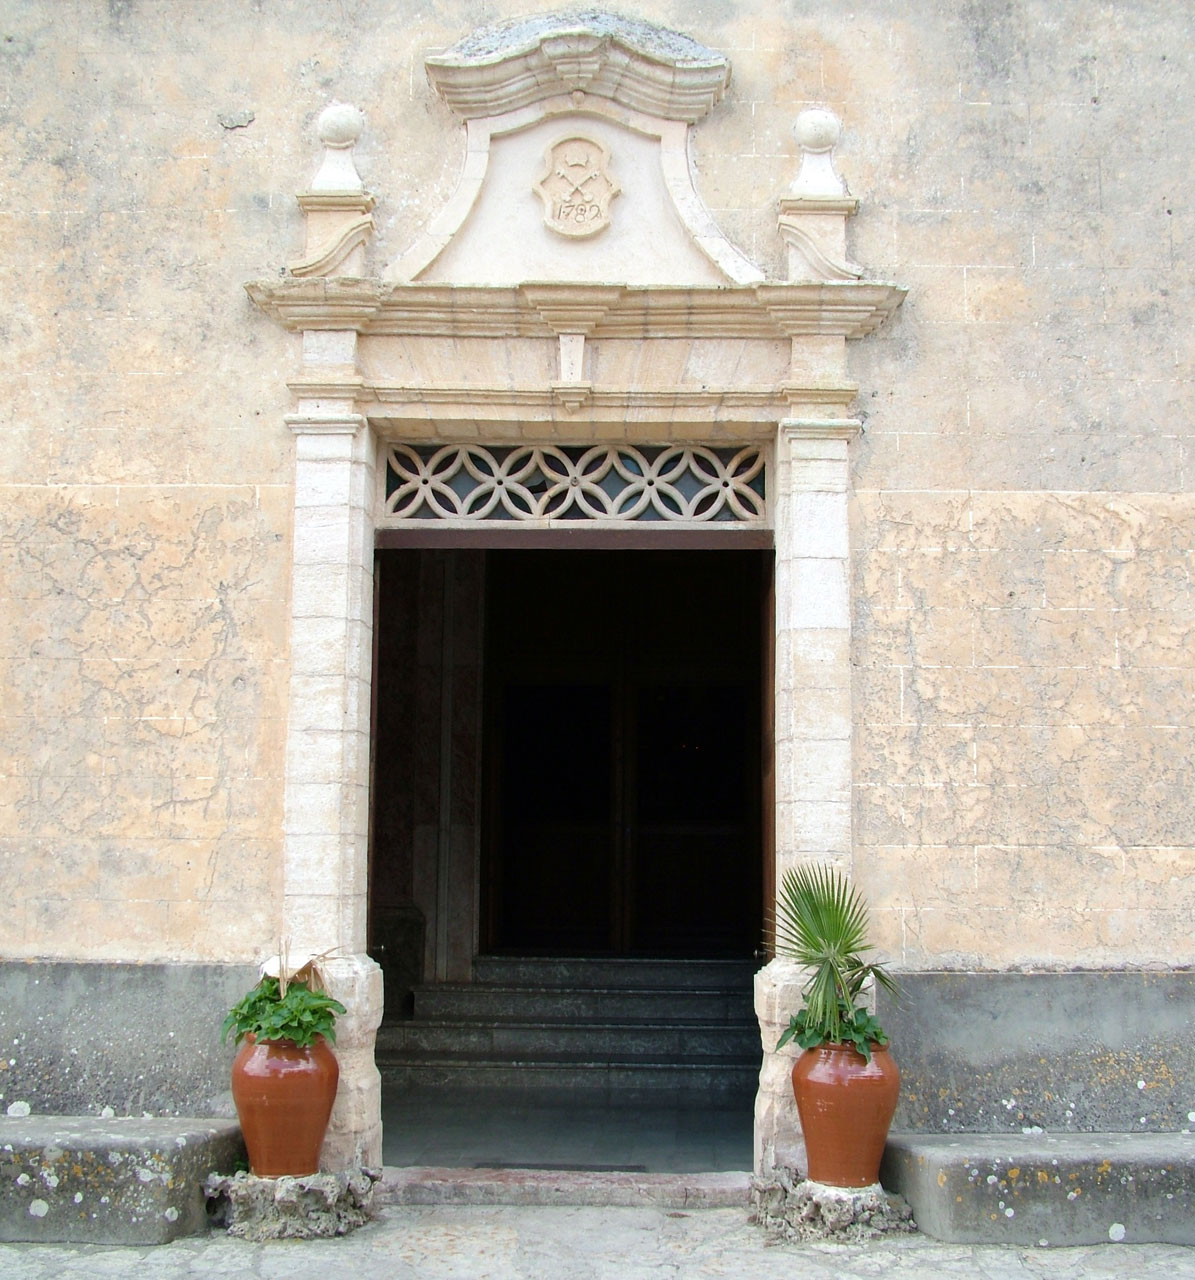 Entrance To The Church